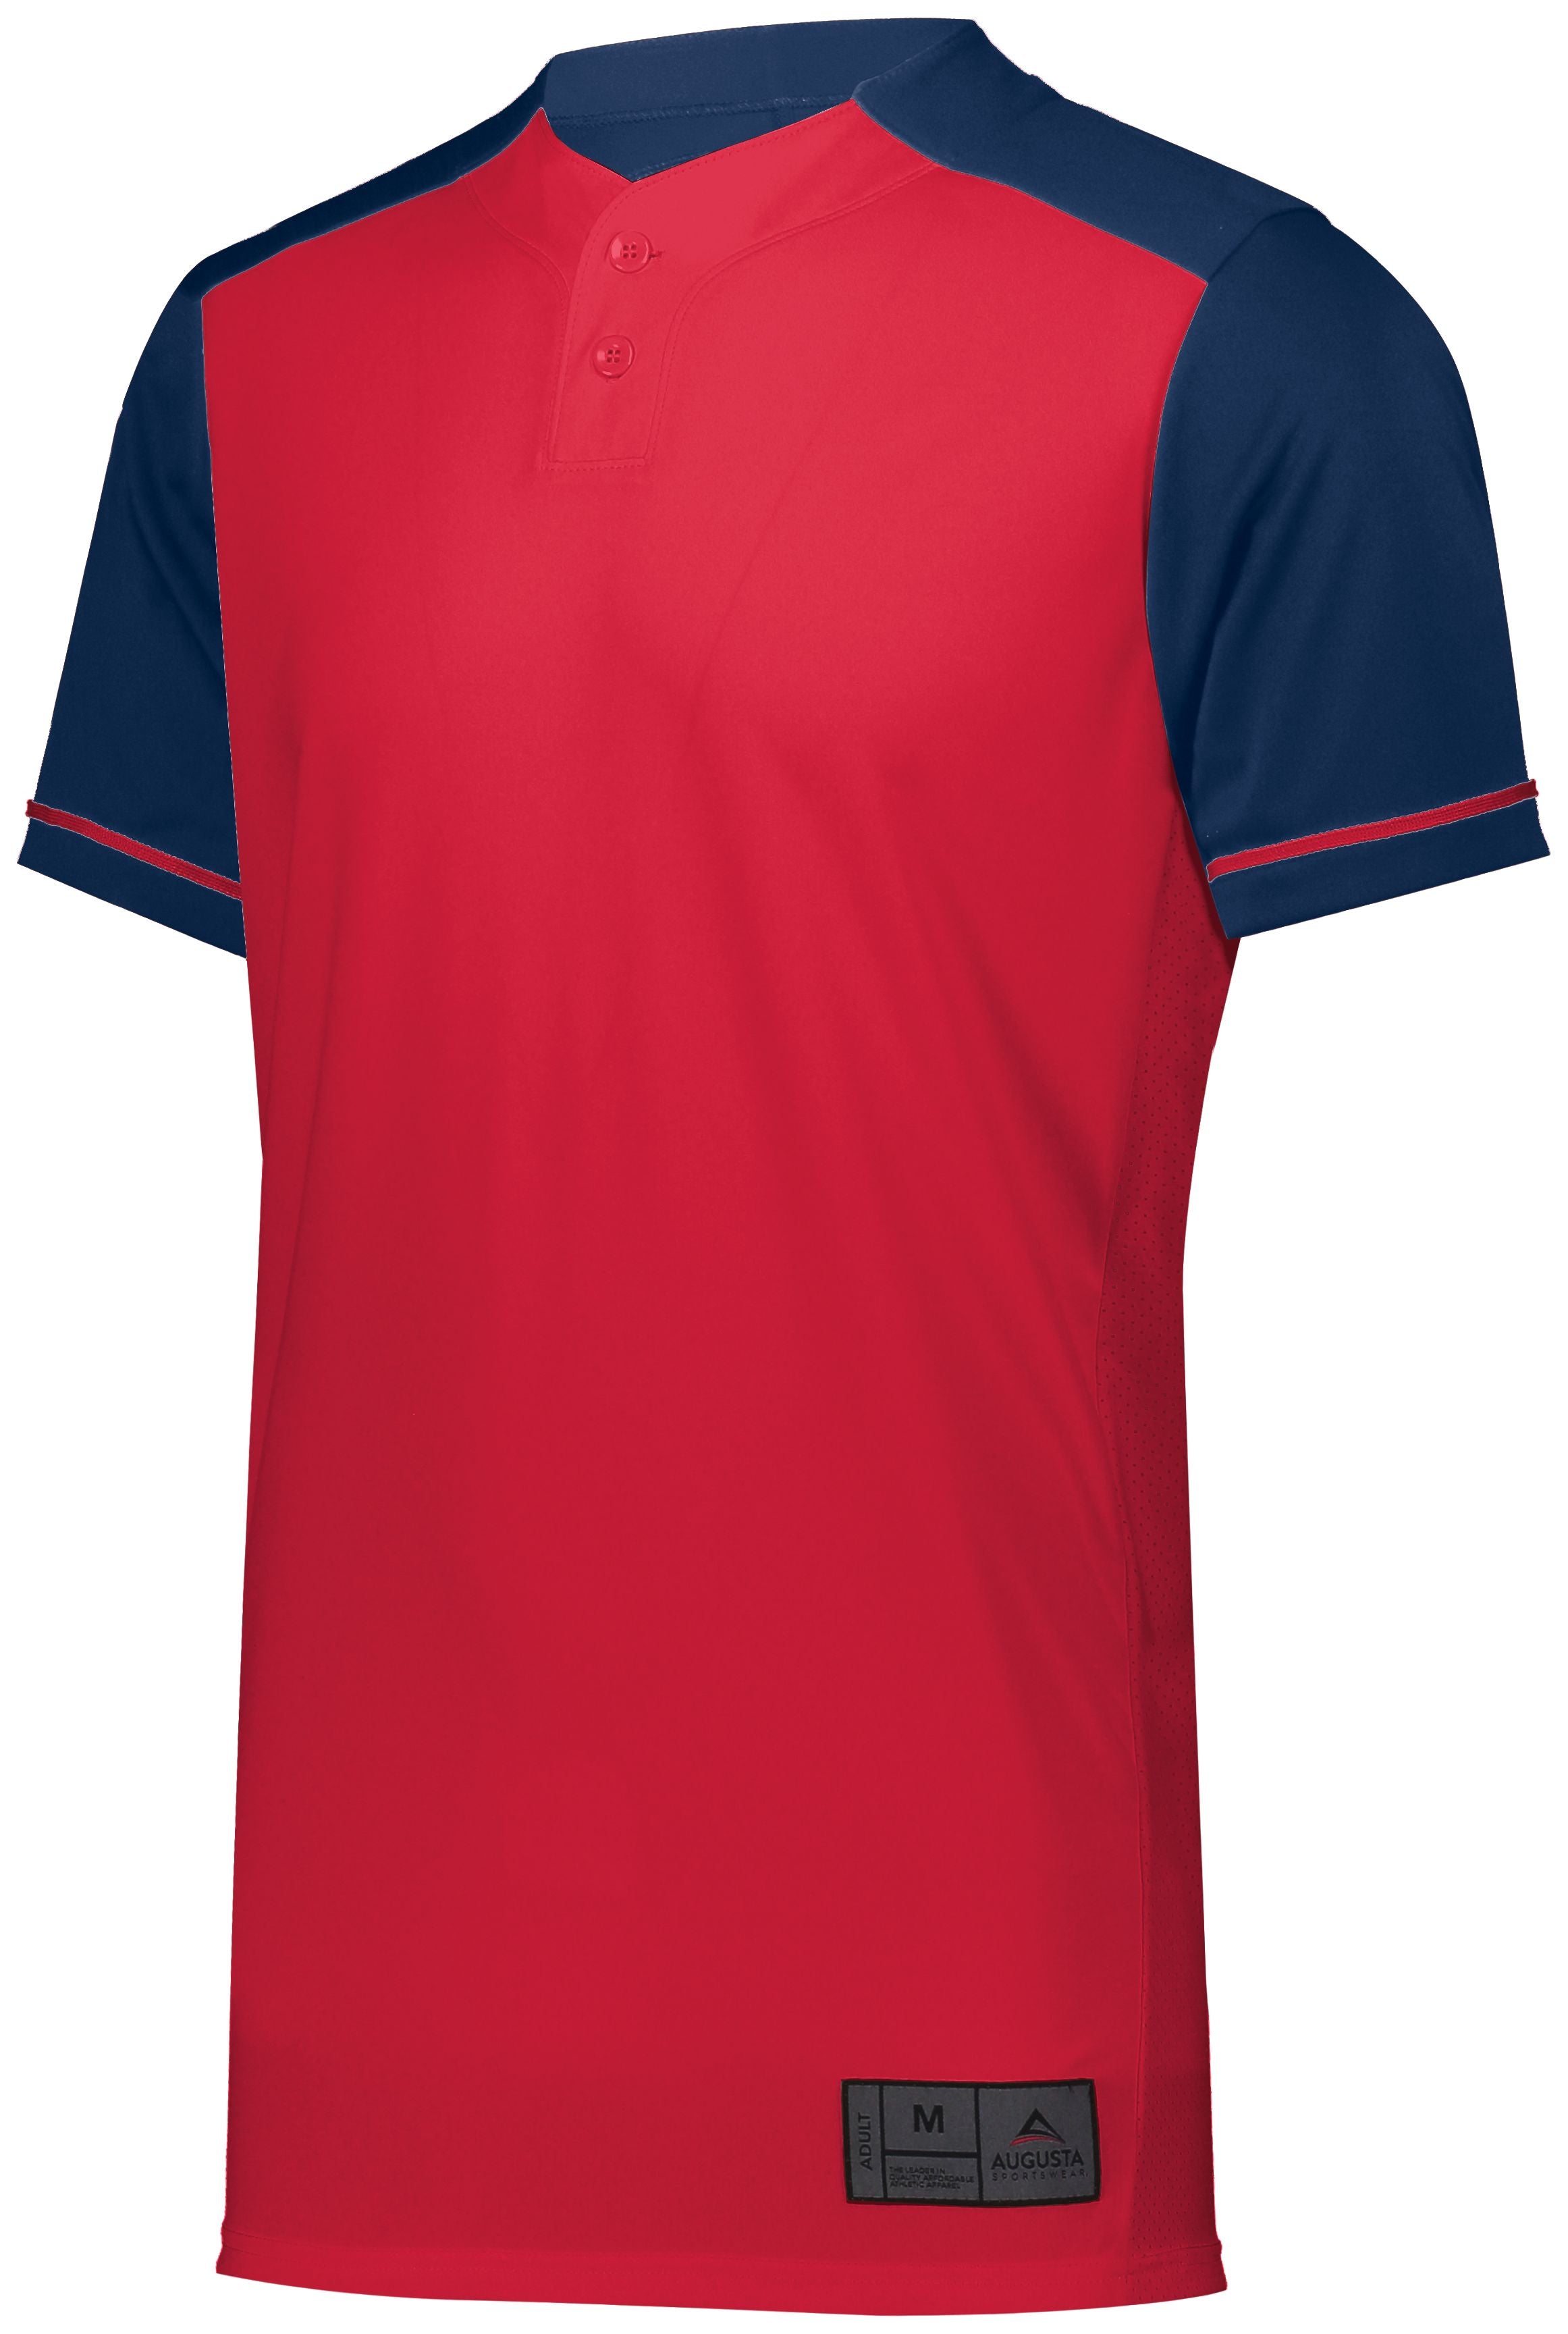 Augusta Sportswear Closer Jersey in Scarlet/Navy  -Part of the Adult, Adult-Jersey, Augusta-Products, Baseball, Shirts, All-Sports, All-Sports-1 product lines at KanaleyCreations.com